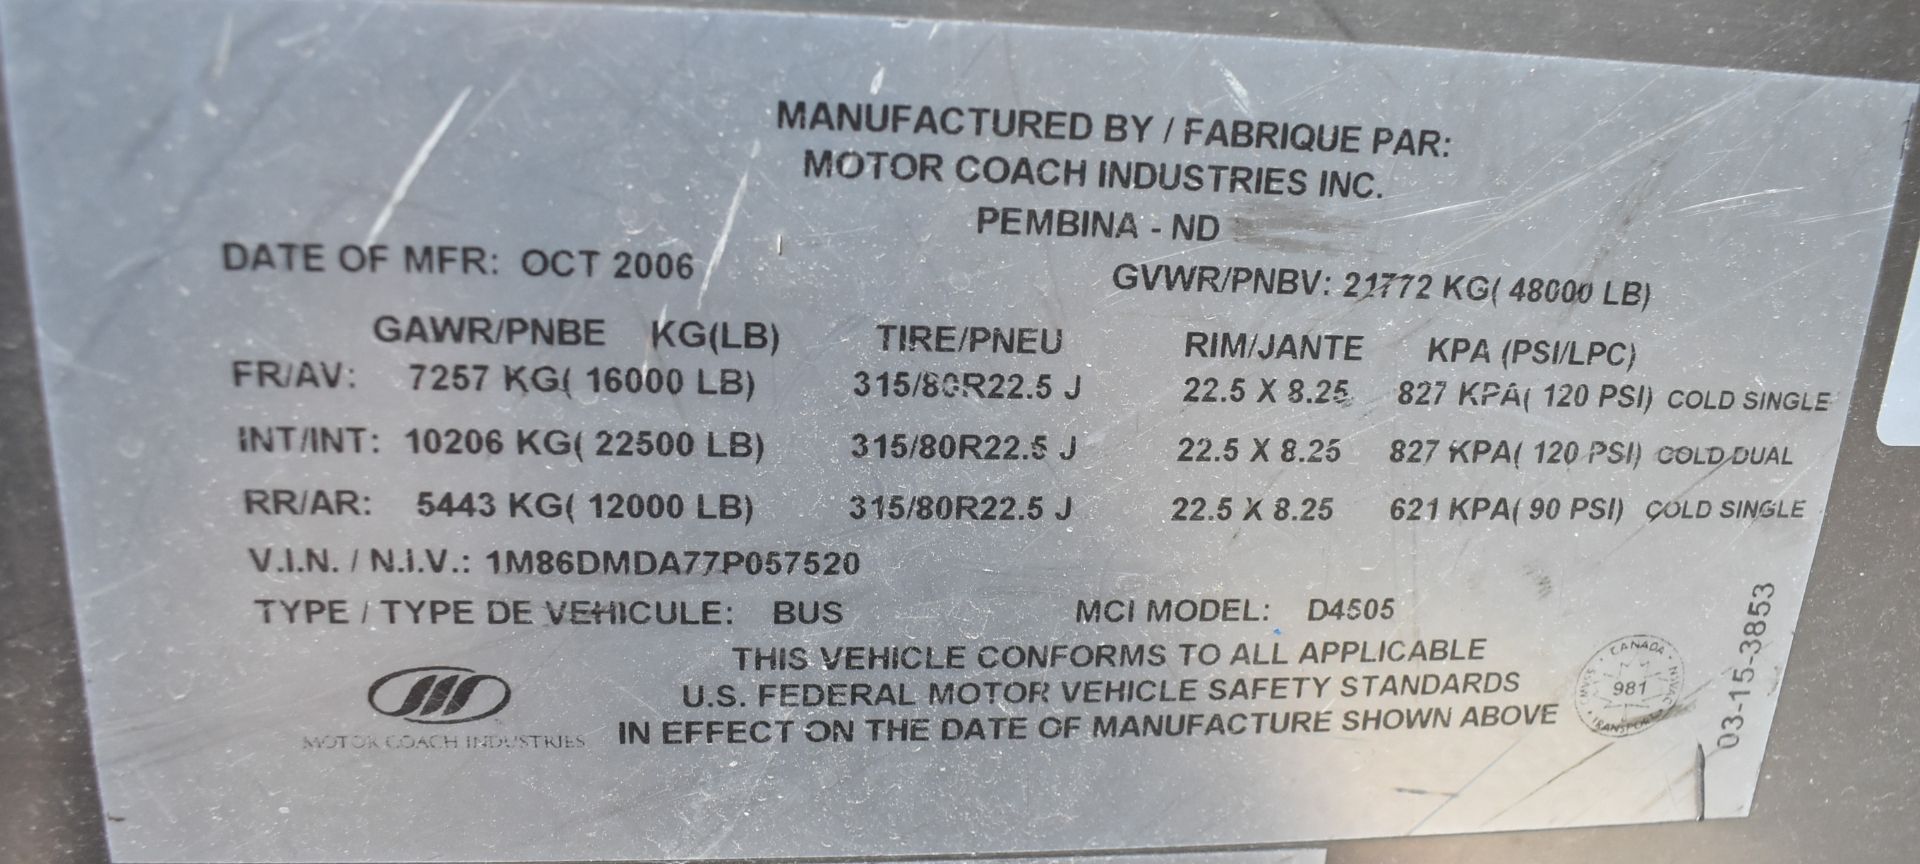 MOTOR COACH INDUSTRIES (2007) D4505 MOTOR COACH WITH CATERPILLAR C13 12.5L DIESEL ENGINE - Image 18 of 19